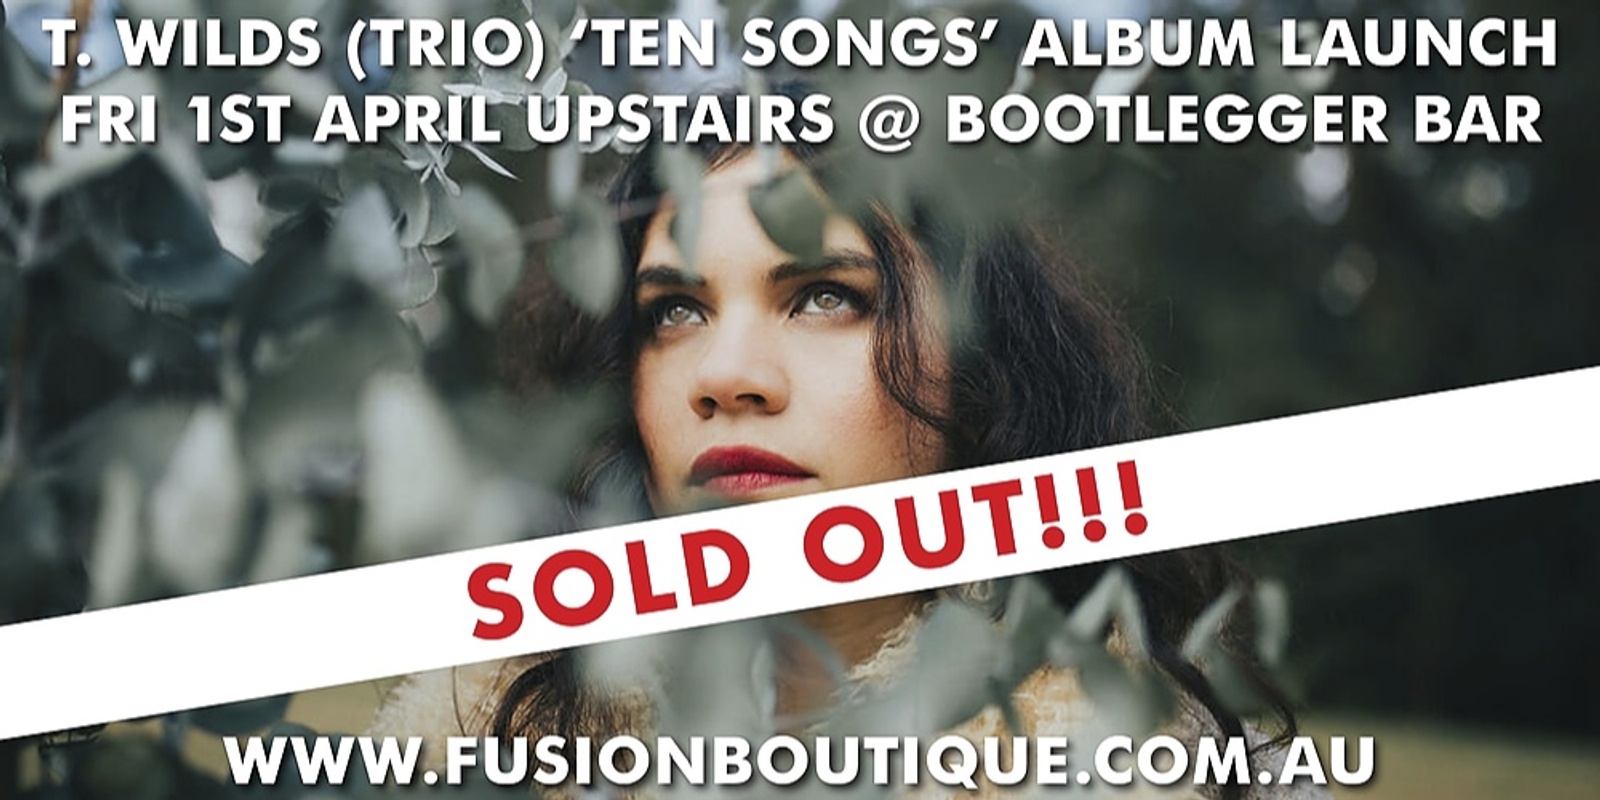 Banner image for SOLD OUT - T.WILDS 'Ten Songs' Album Launch Live in Concert at Bootlegger Bar, Katoomba, Blue Mountains